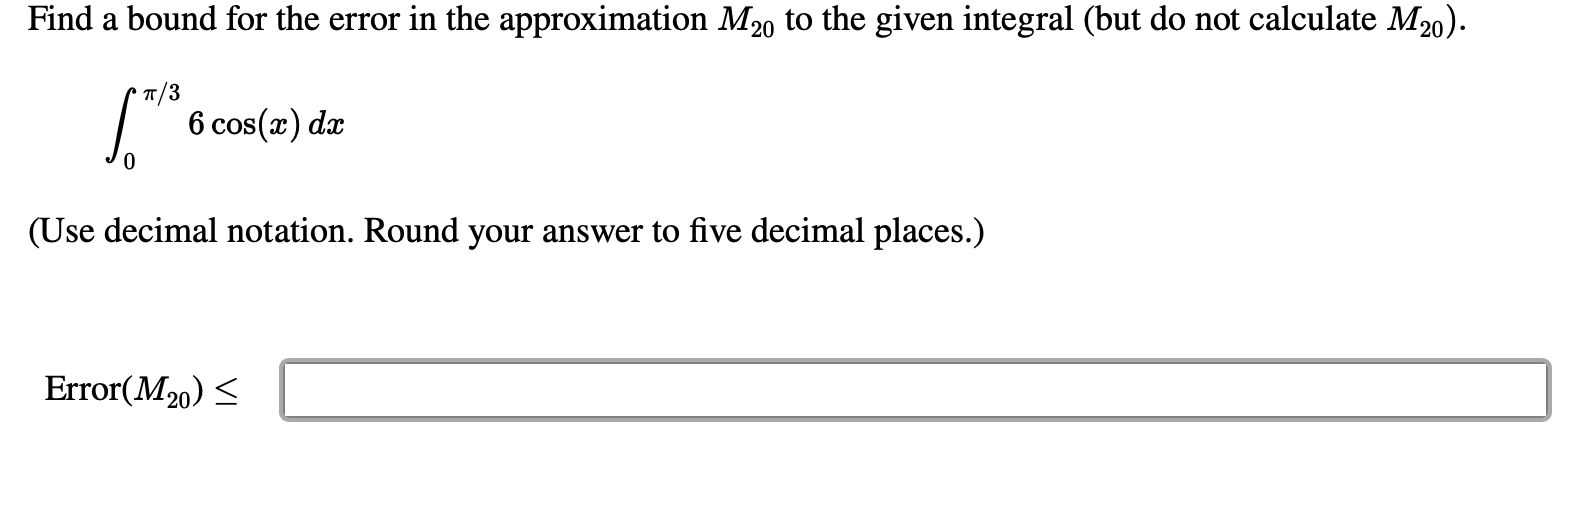 Find a bound for the error in the approximation M20 to the given integral (but do not calculate M20).
п/3
6 cos(x) dæ
(Use decimal notation. Round your answer to five decimal places.)
Error(M20) <
